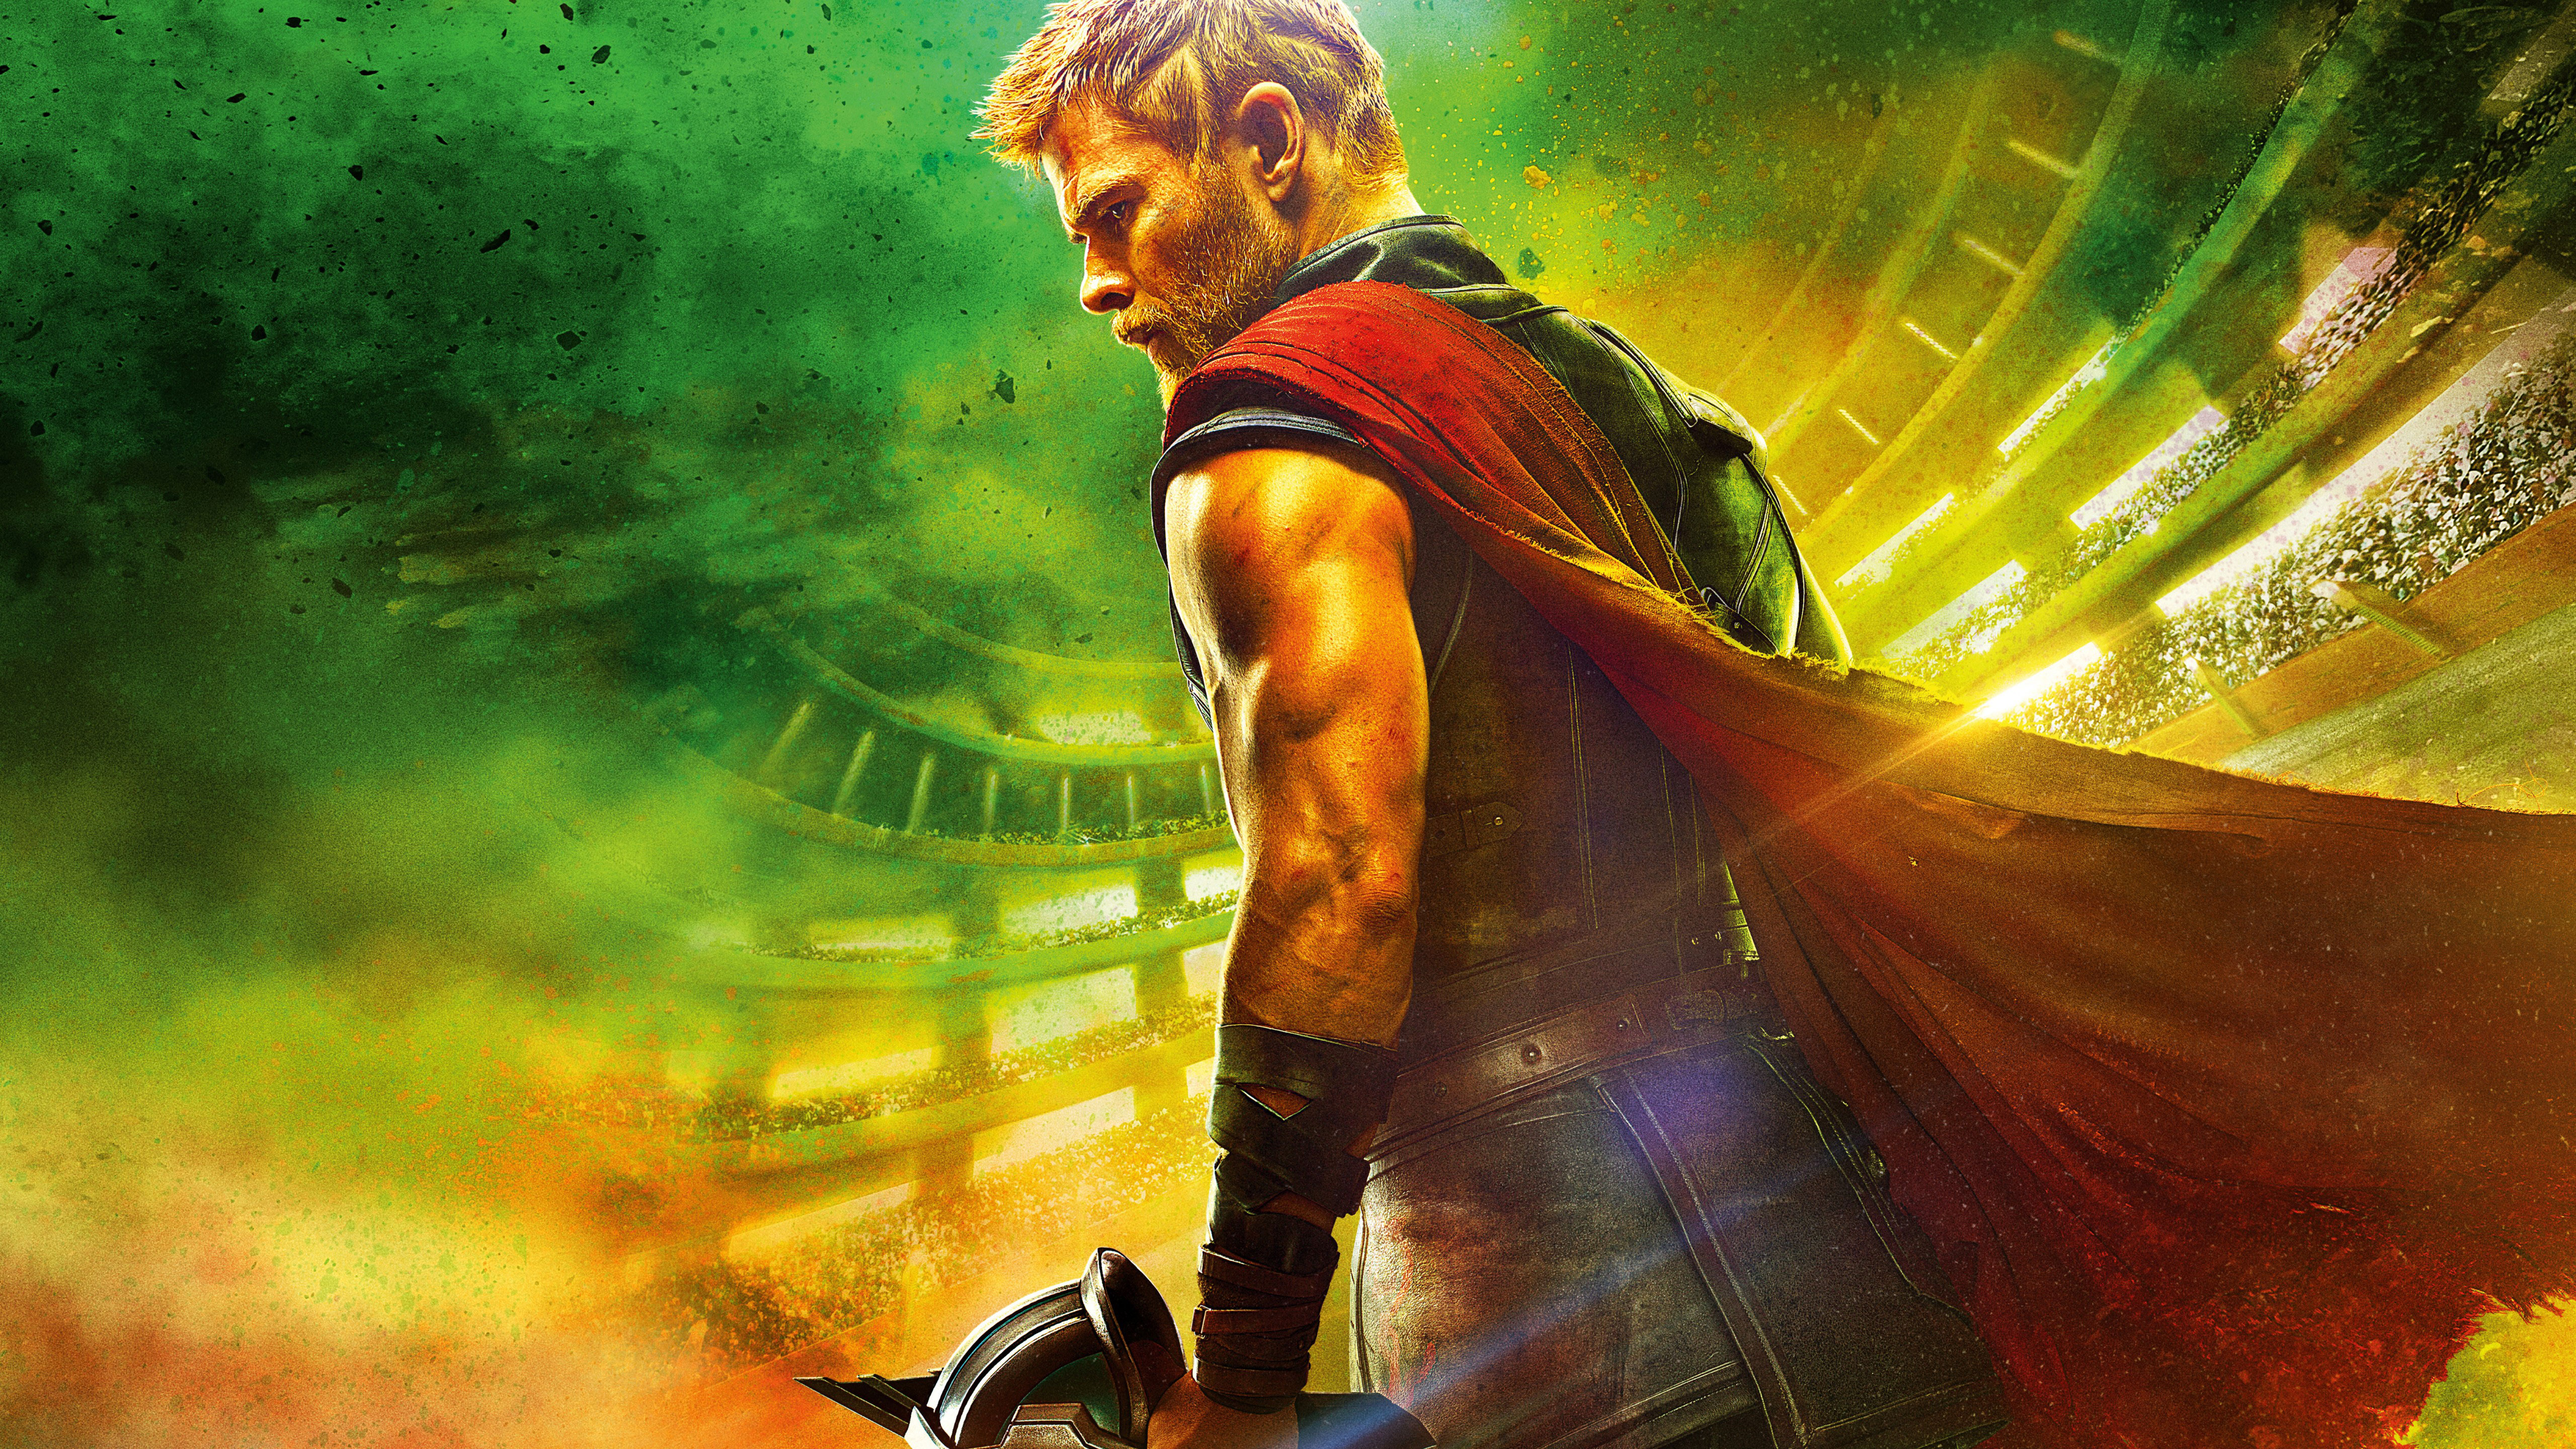 Wallpapers Thor 2017 Movies movies on the desktop